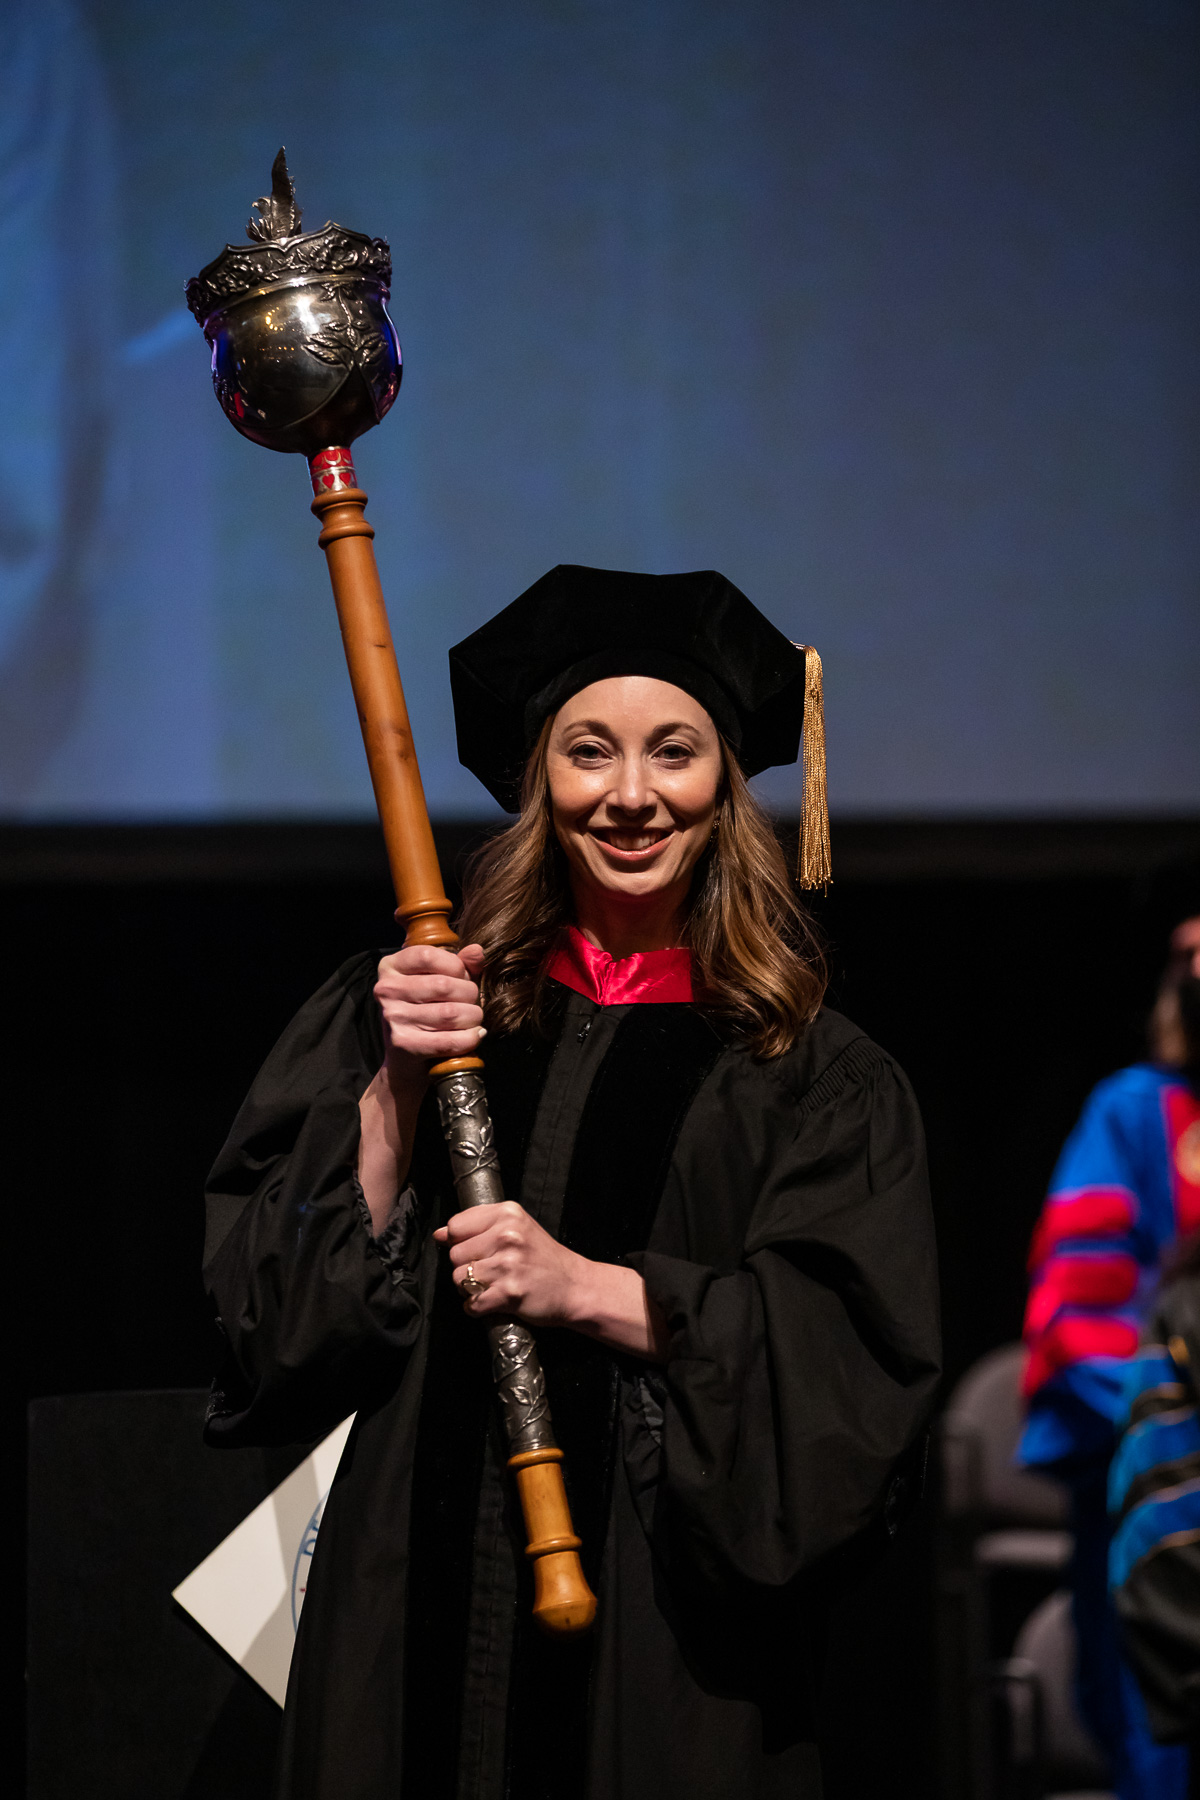 Wendy Epstein, professor of Law and associate dean of Research and Faculty Professional Development, carries the university mace during the procession.